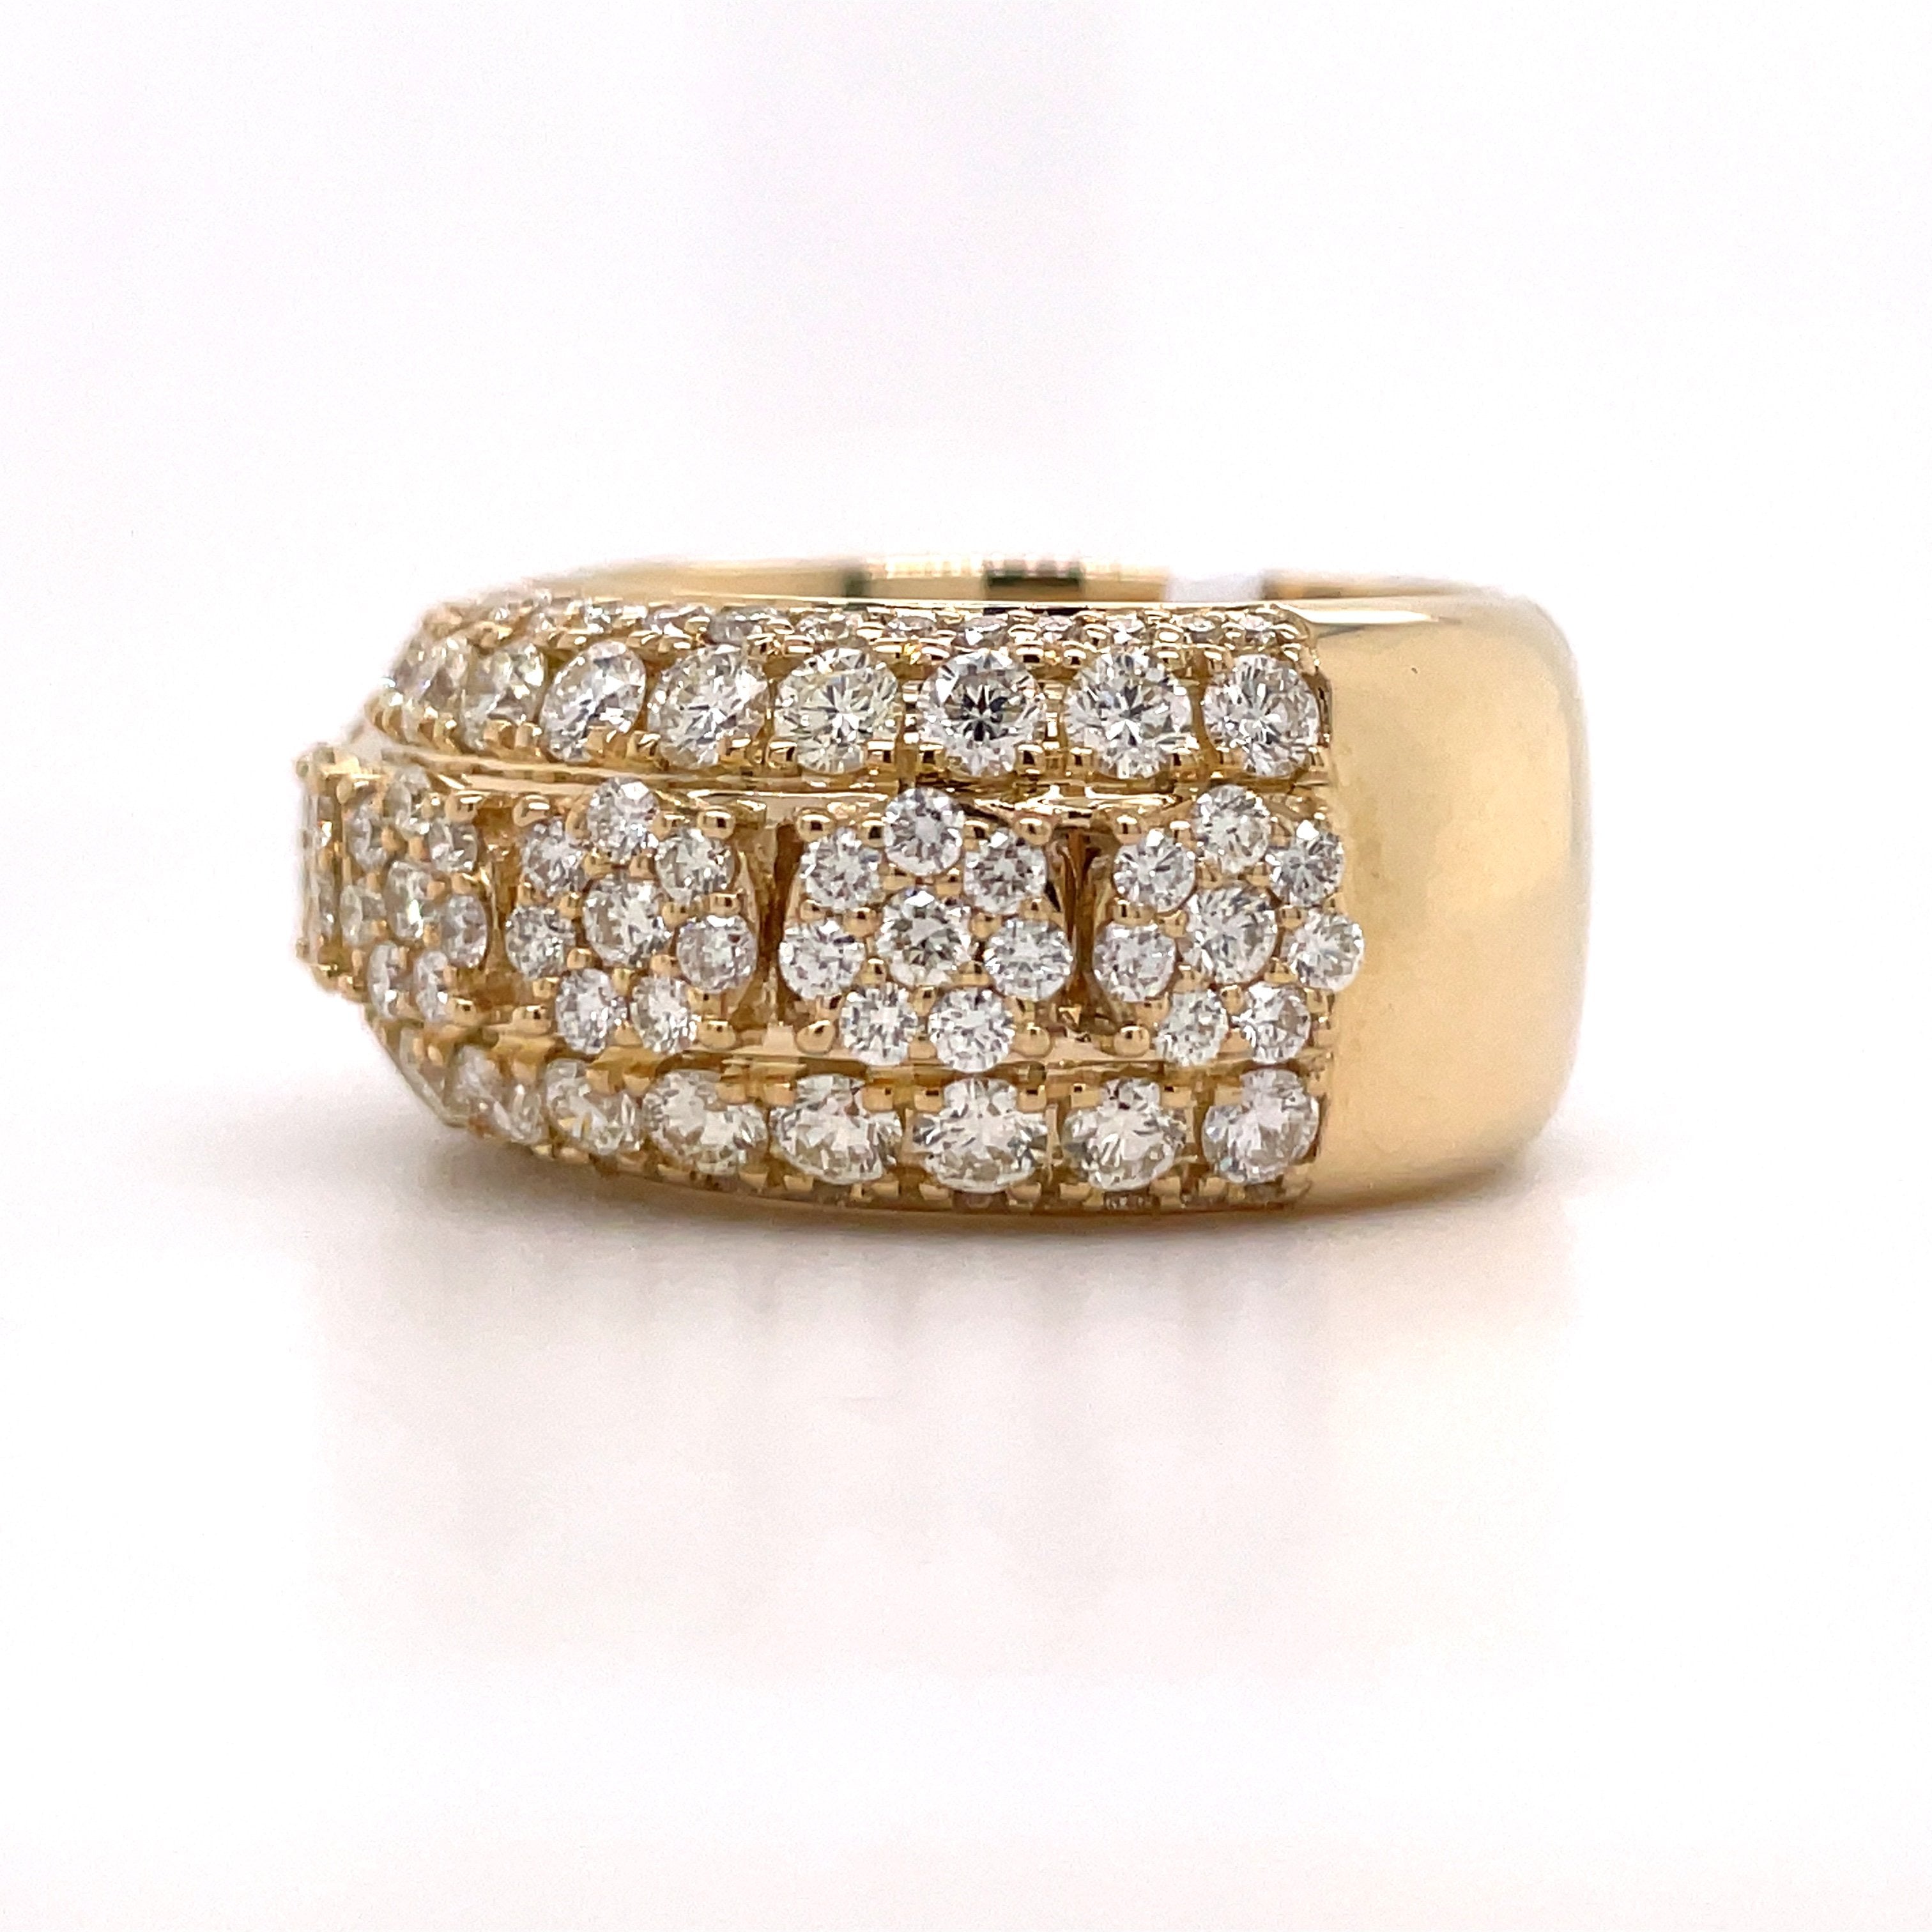 4.00 CT. Diamond Ring in 10KT Gold - White Carat - USA & Canada